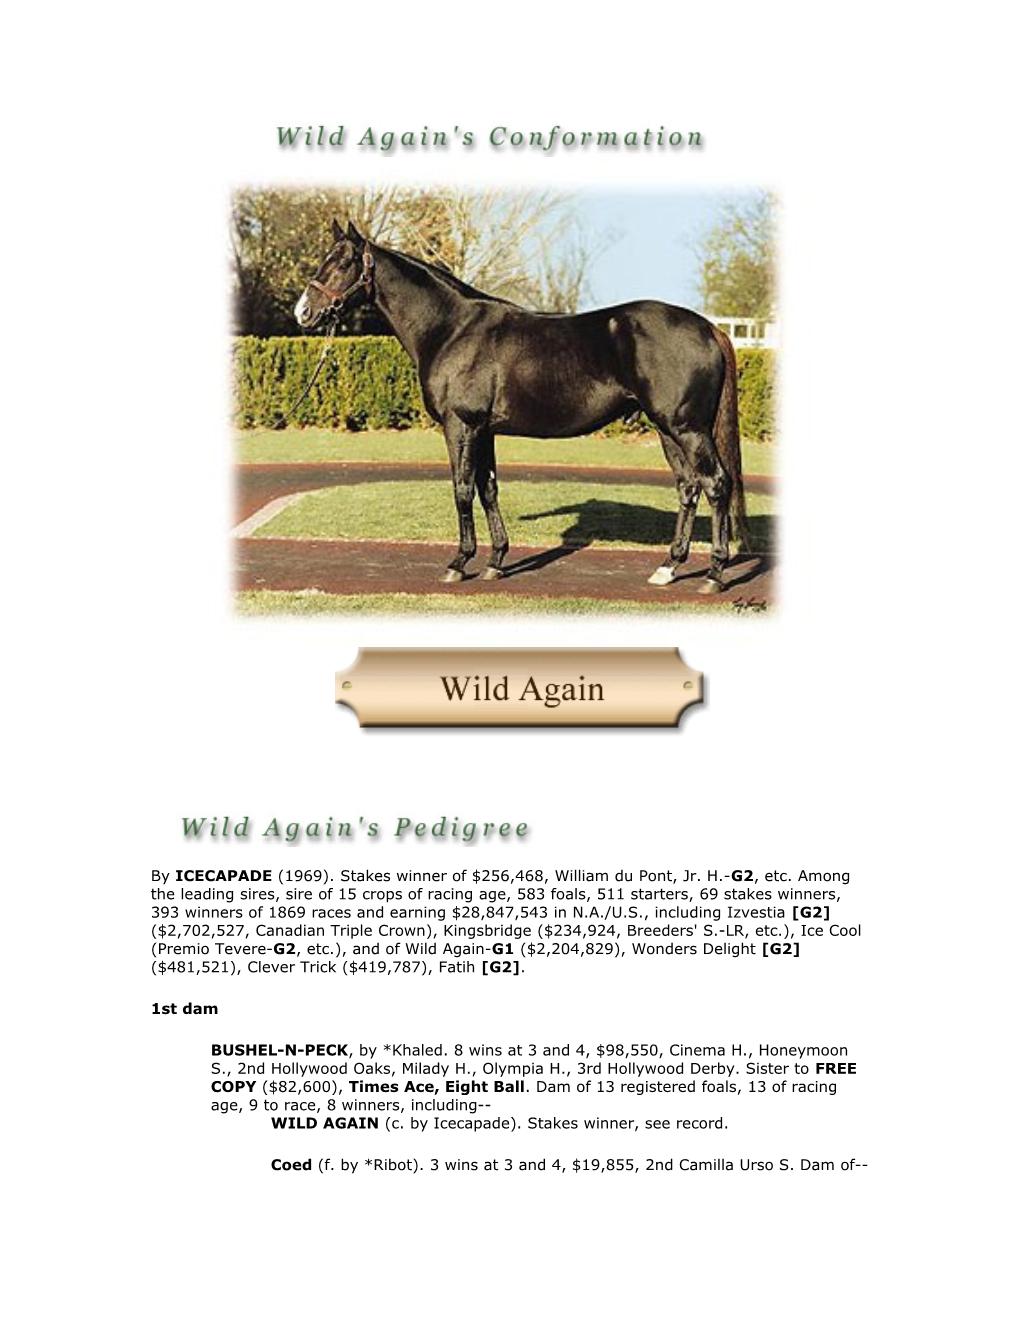 WILD AGAIN (C. by Icecapade). Stakes Winner, See Record